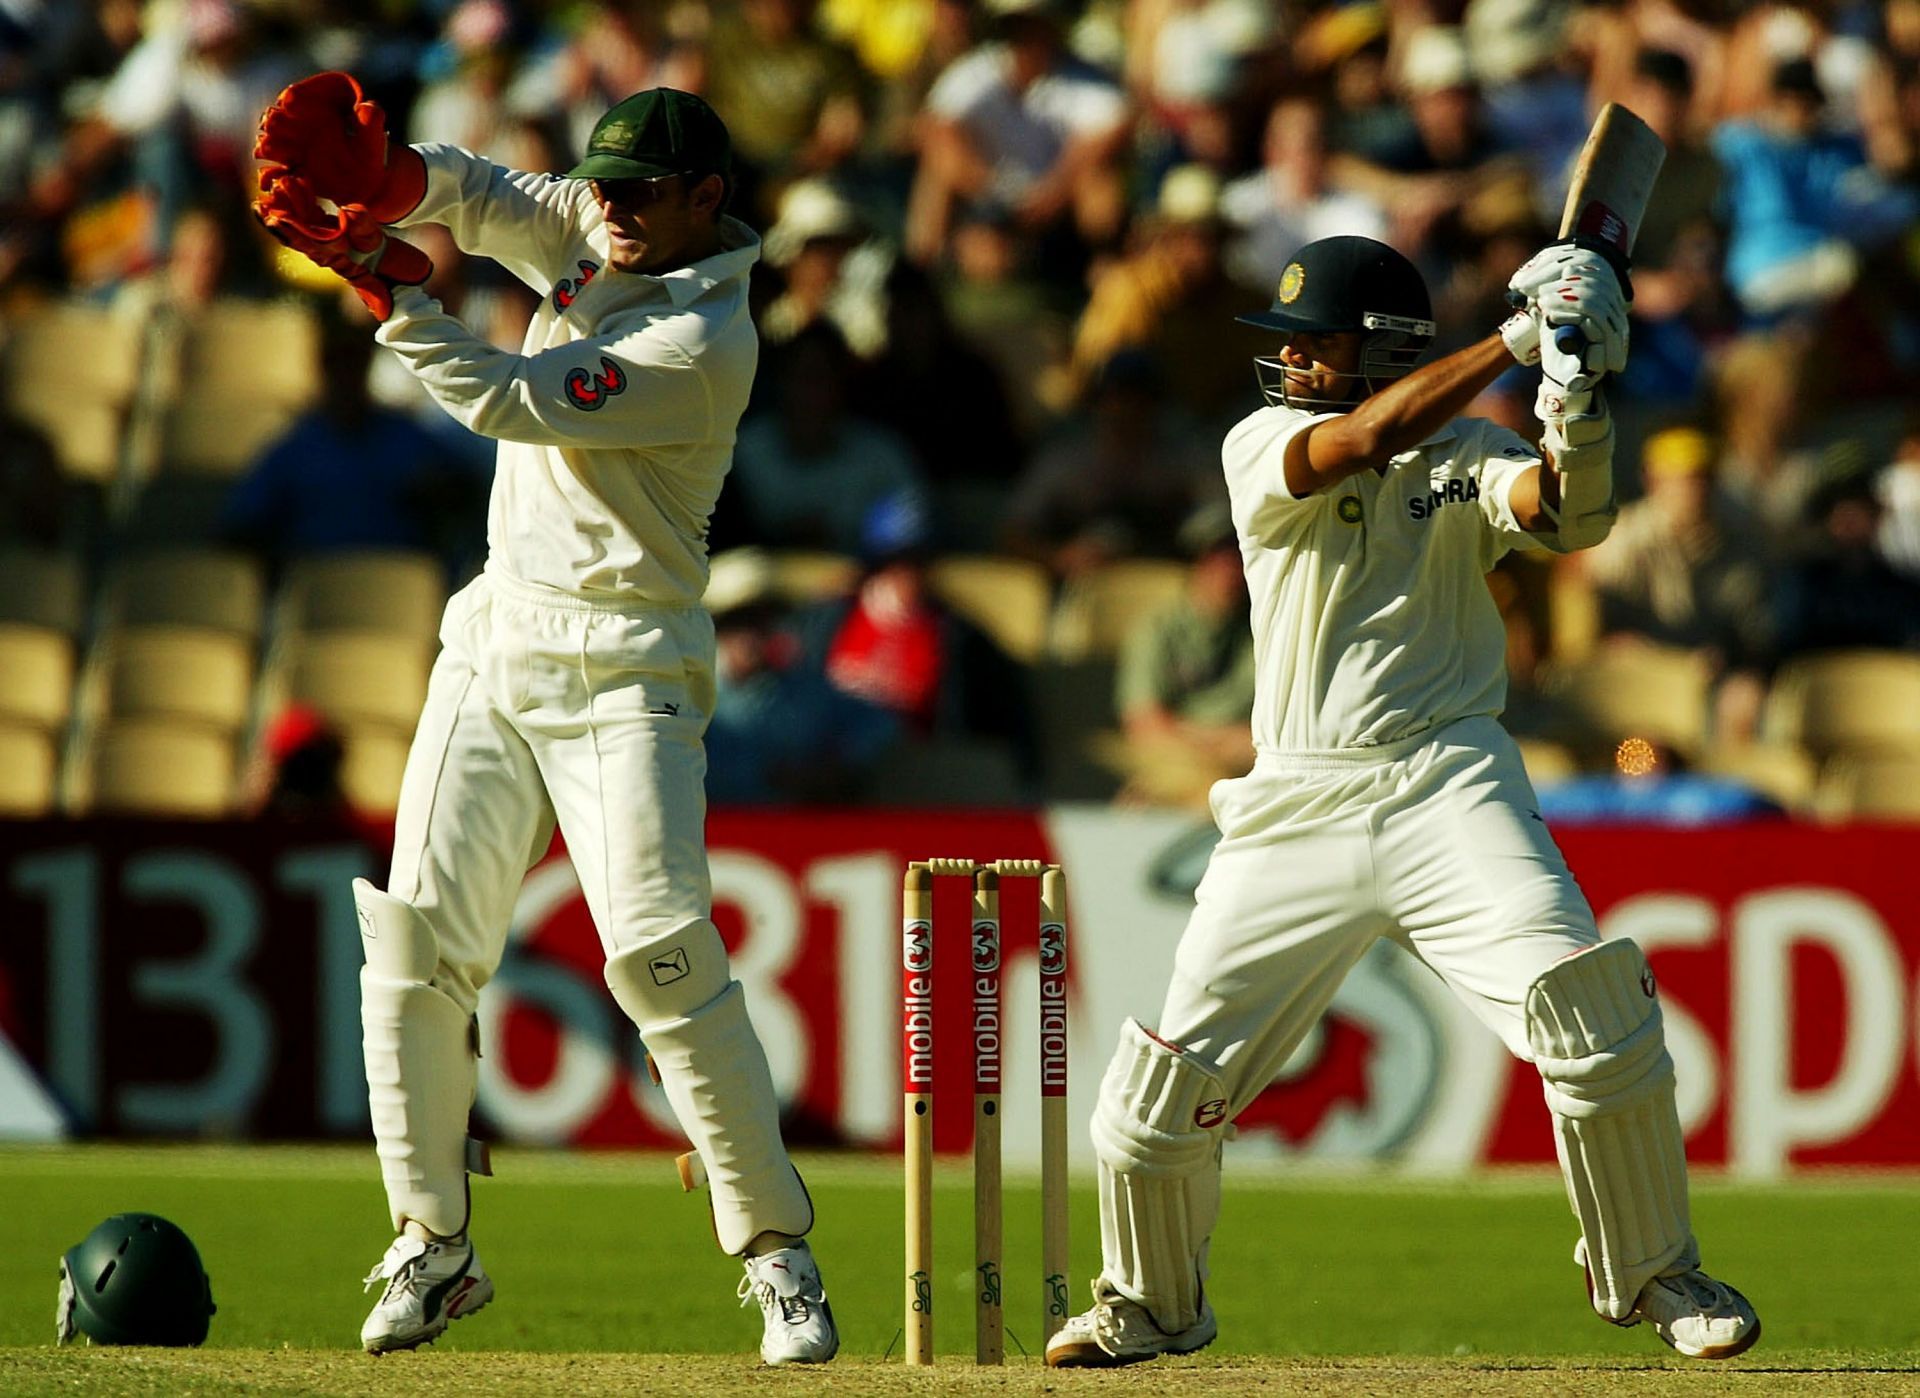 Rahul Dravid during the 2003 Adelaide Test. Pic: Getty Images